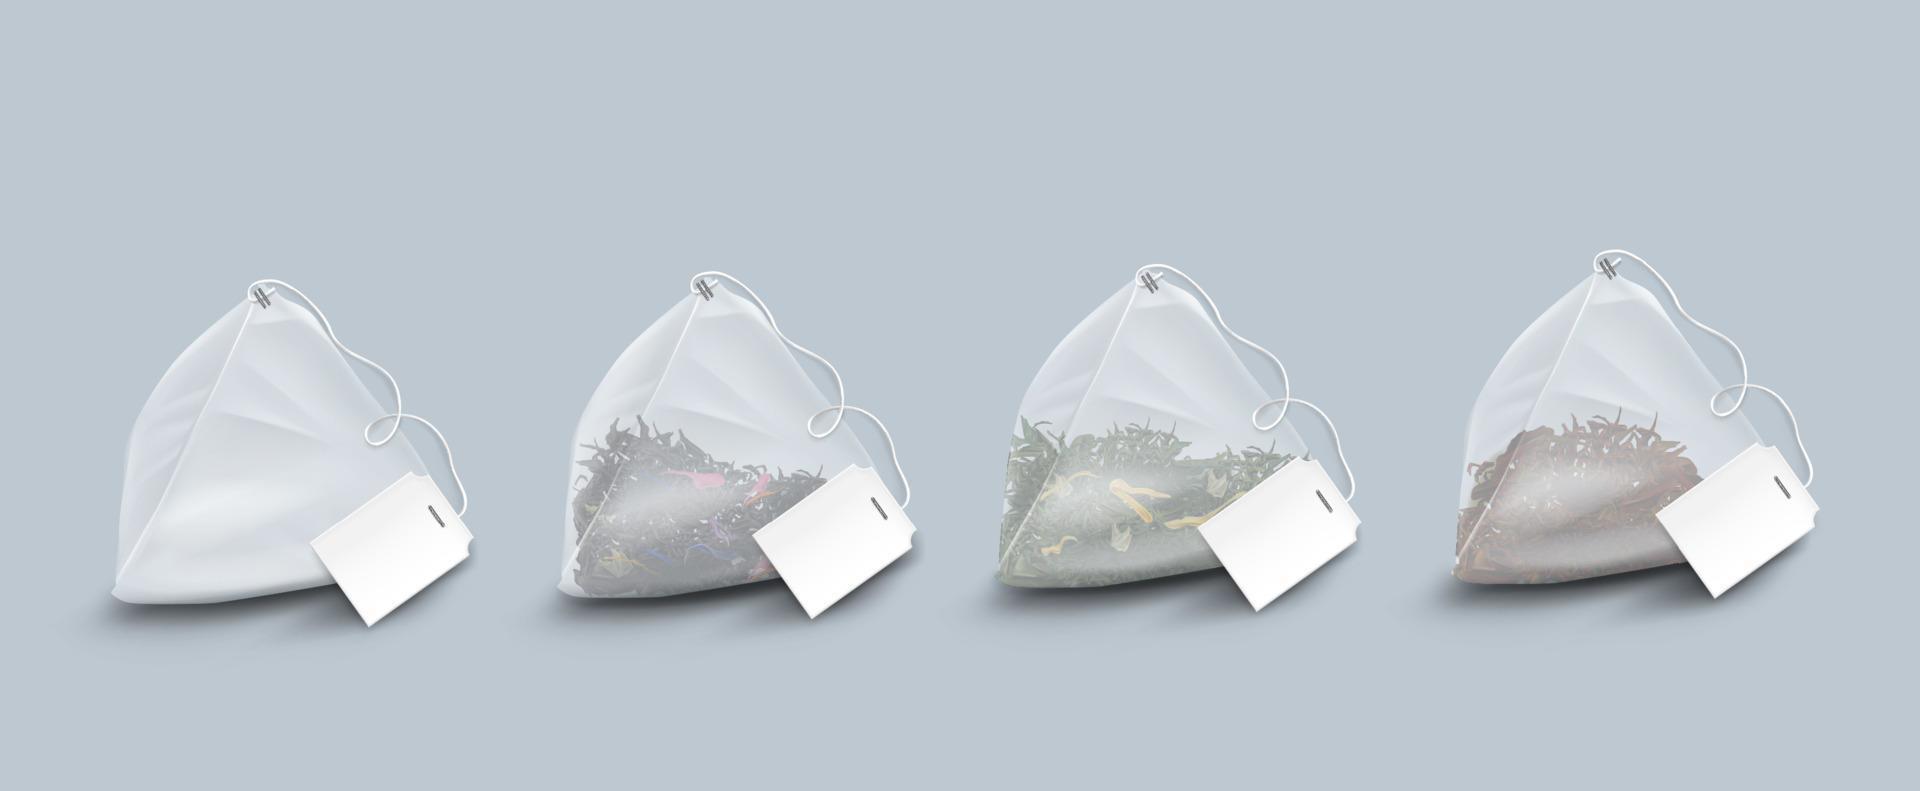 Pyramid shape tea bags with leaves and herbs vector